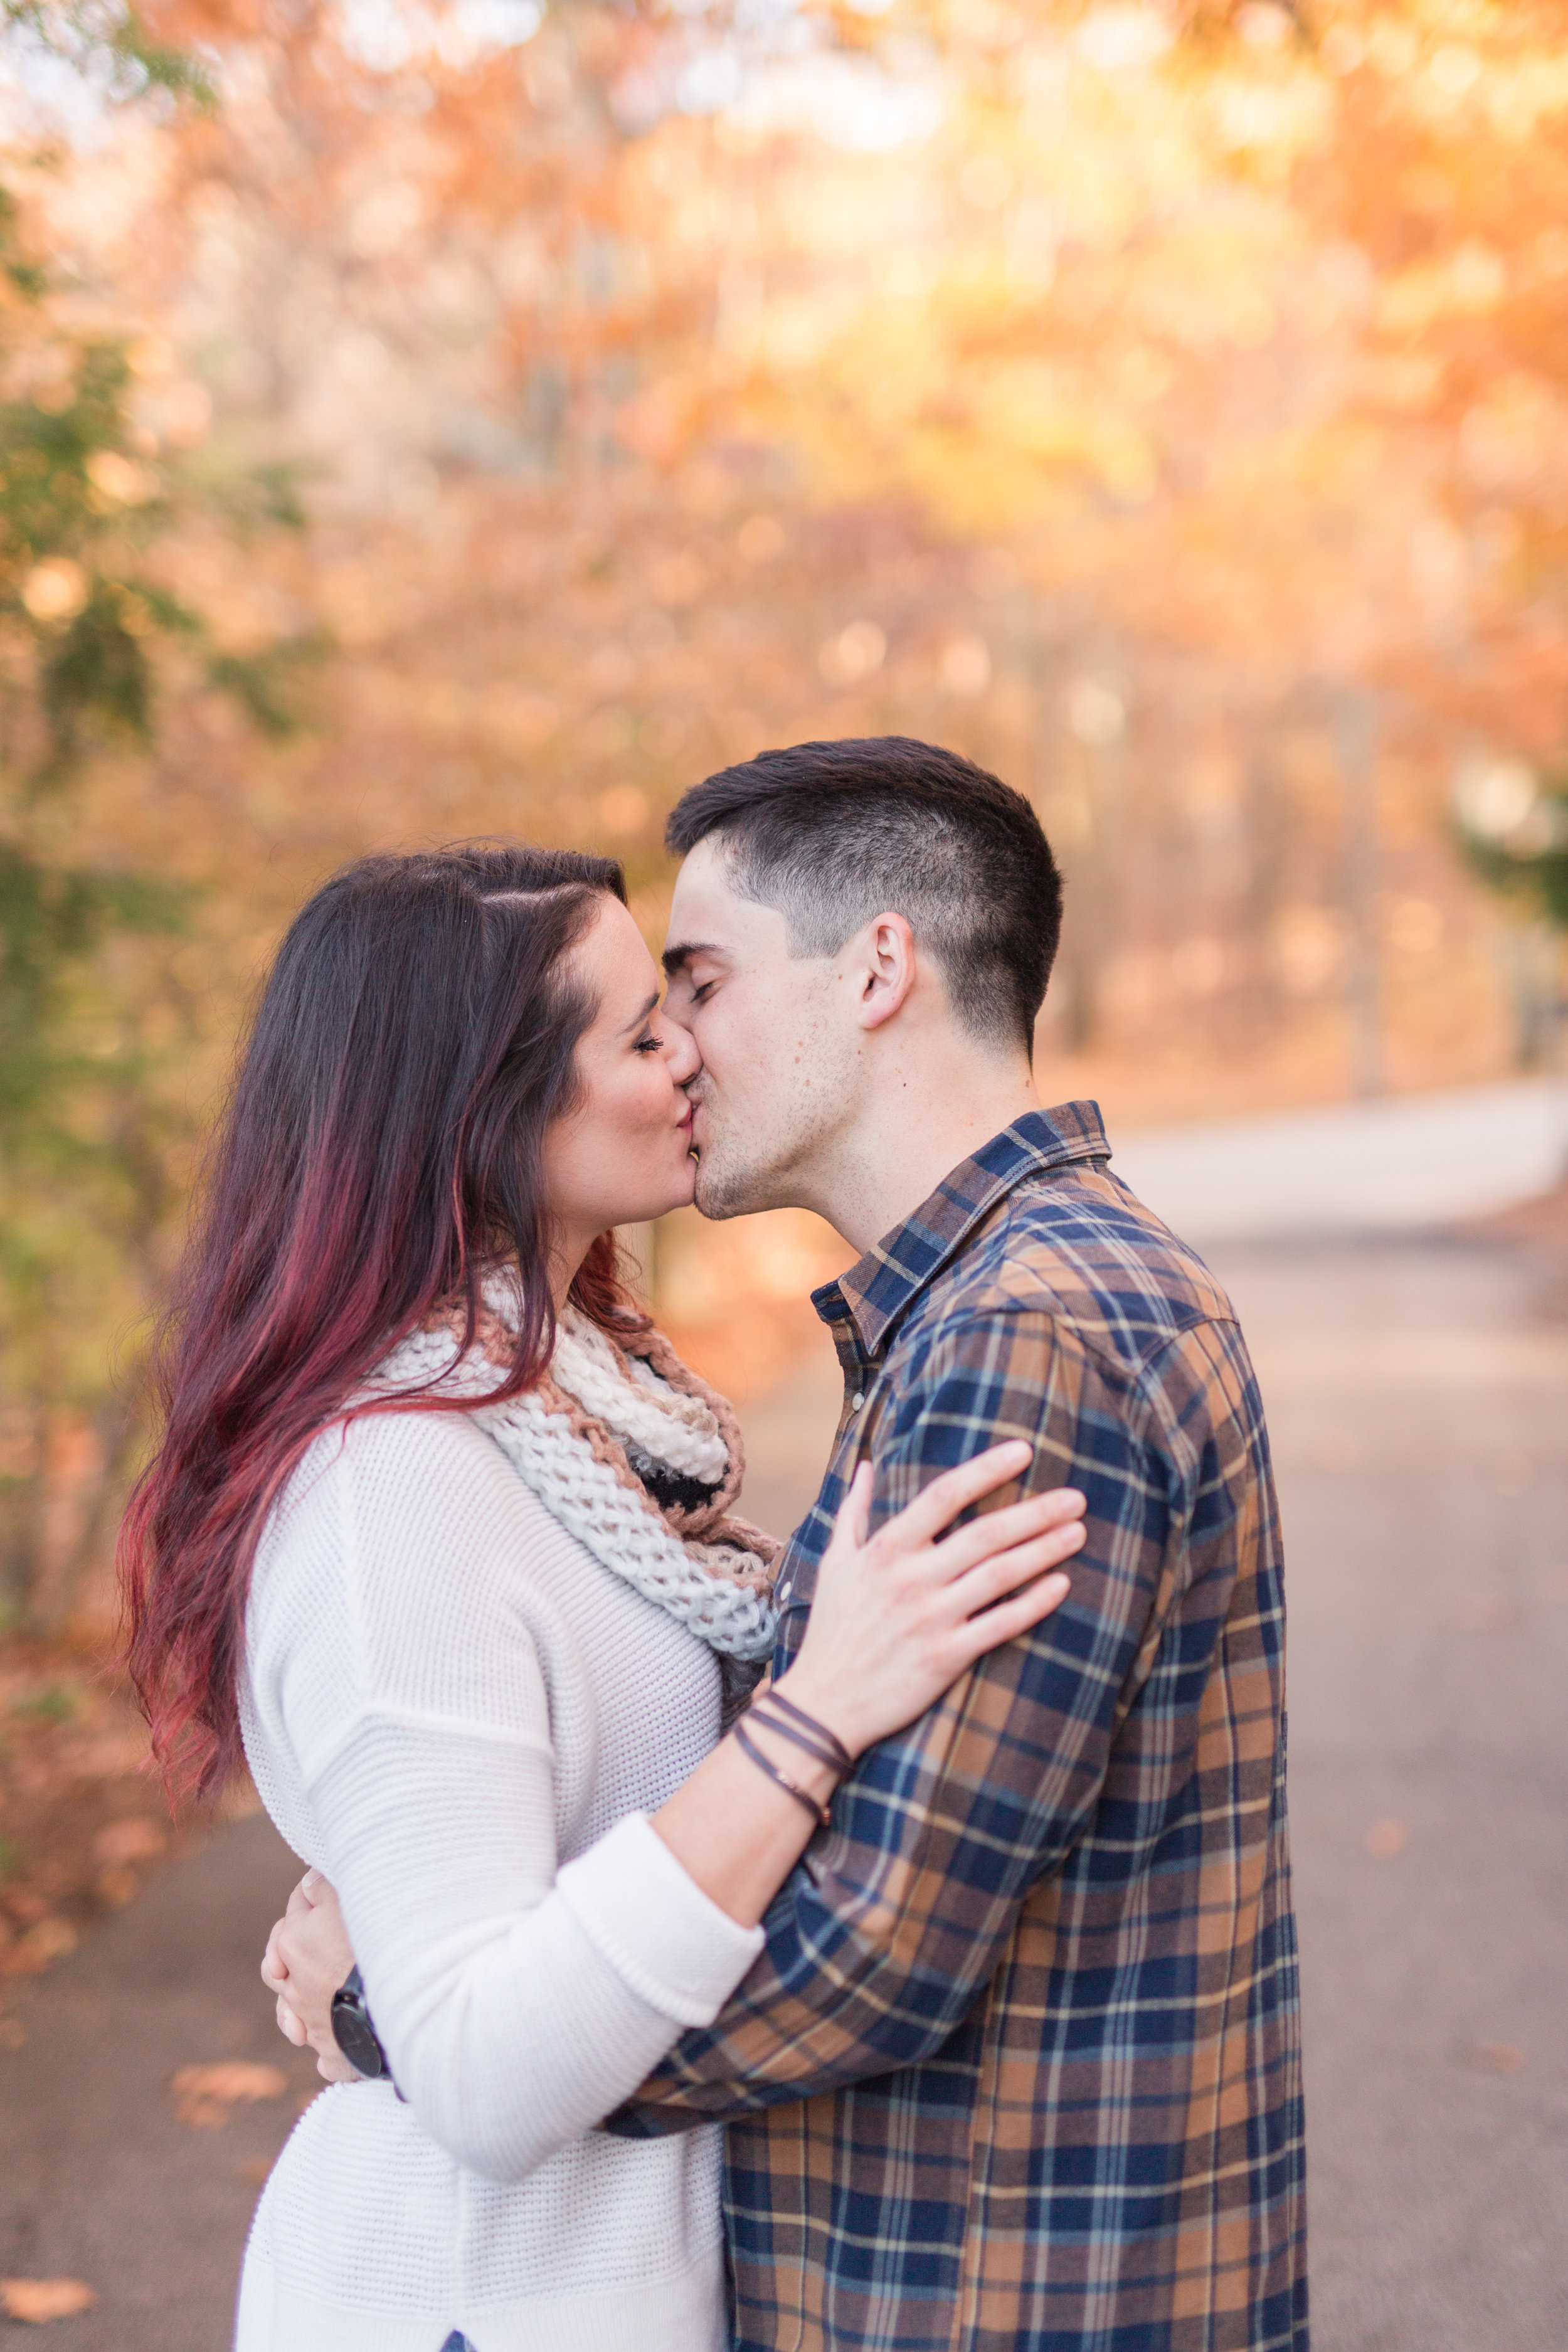 Fall engagement session at the Wintergreen Resort || Lynchburg and Charlottesville Wedding and Portrait Photographer || www.ashleyeiban.com